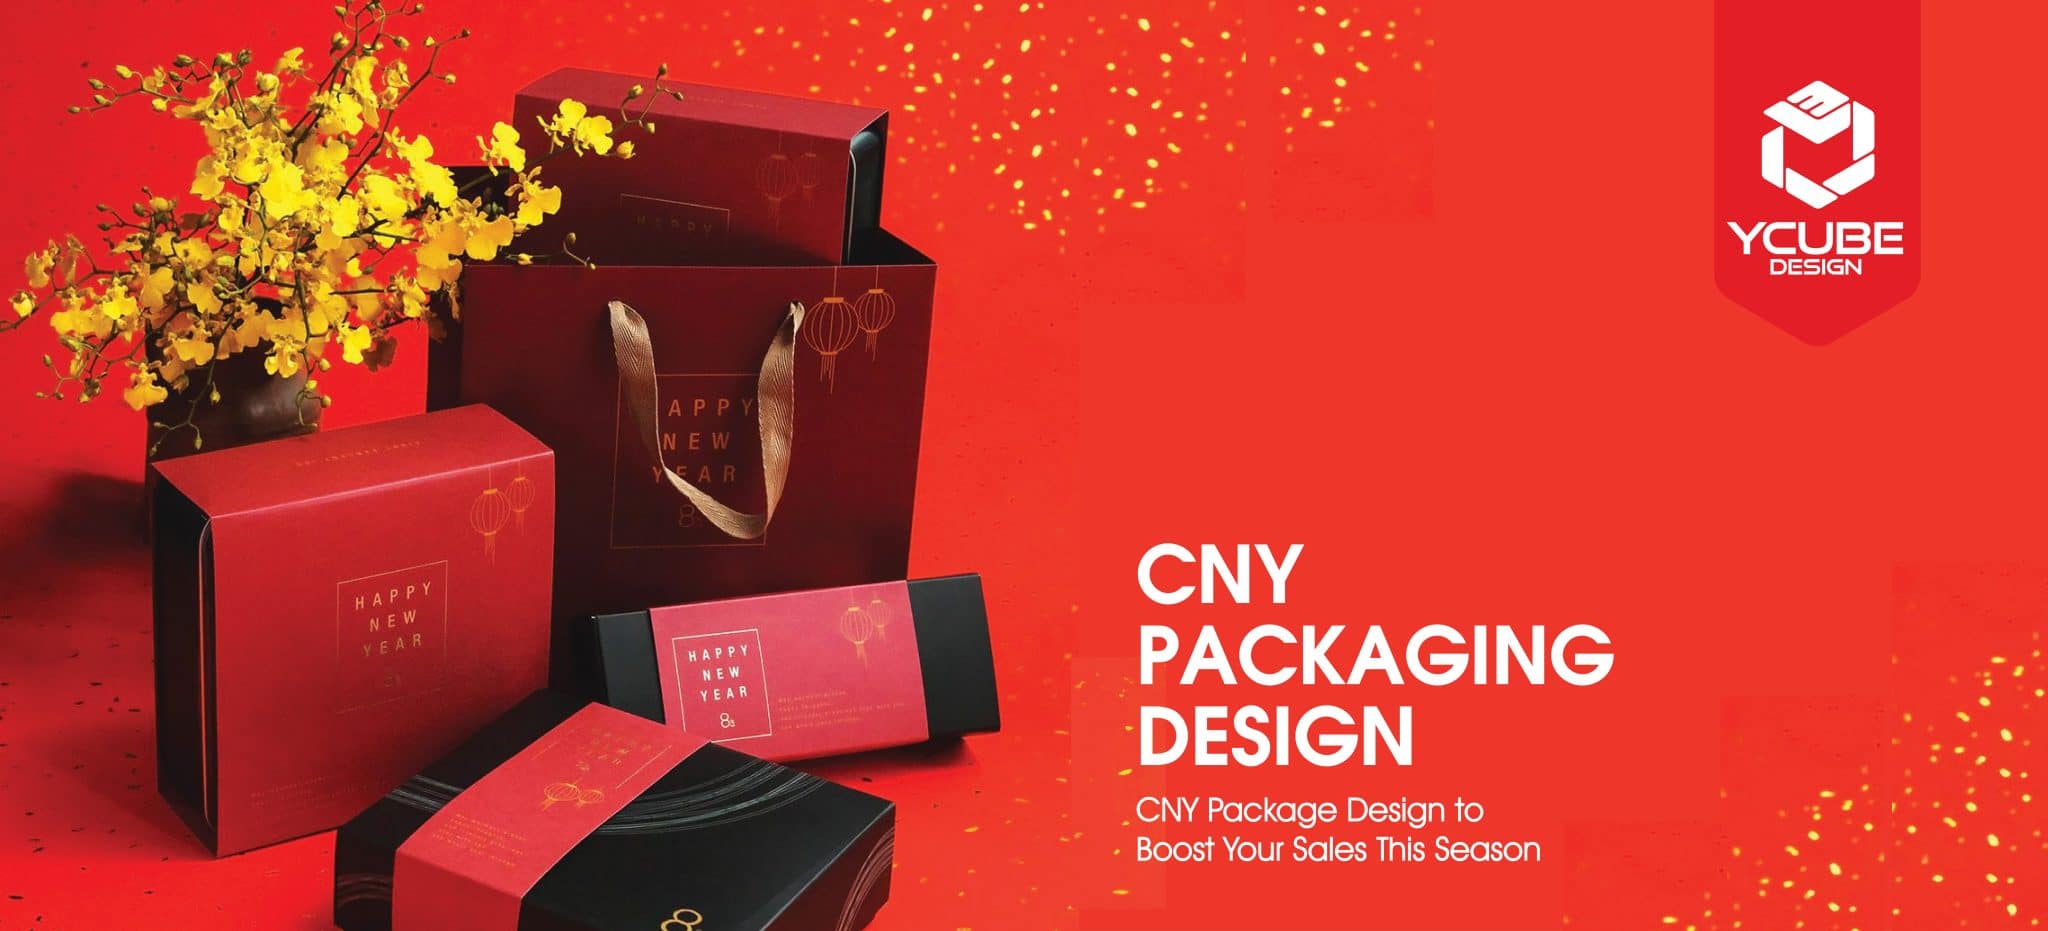 CNY Packaging Design Ycube Design